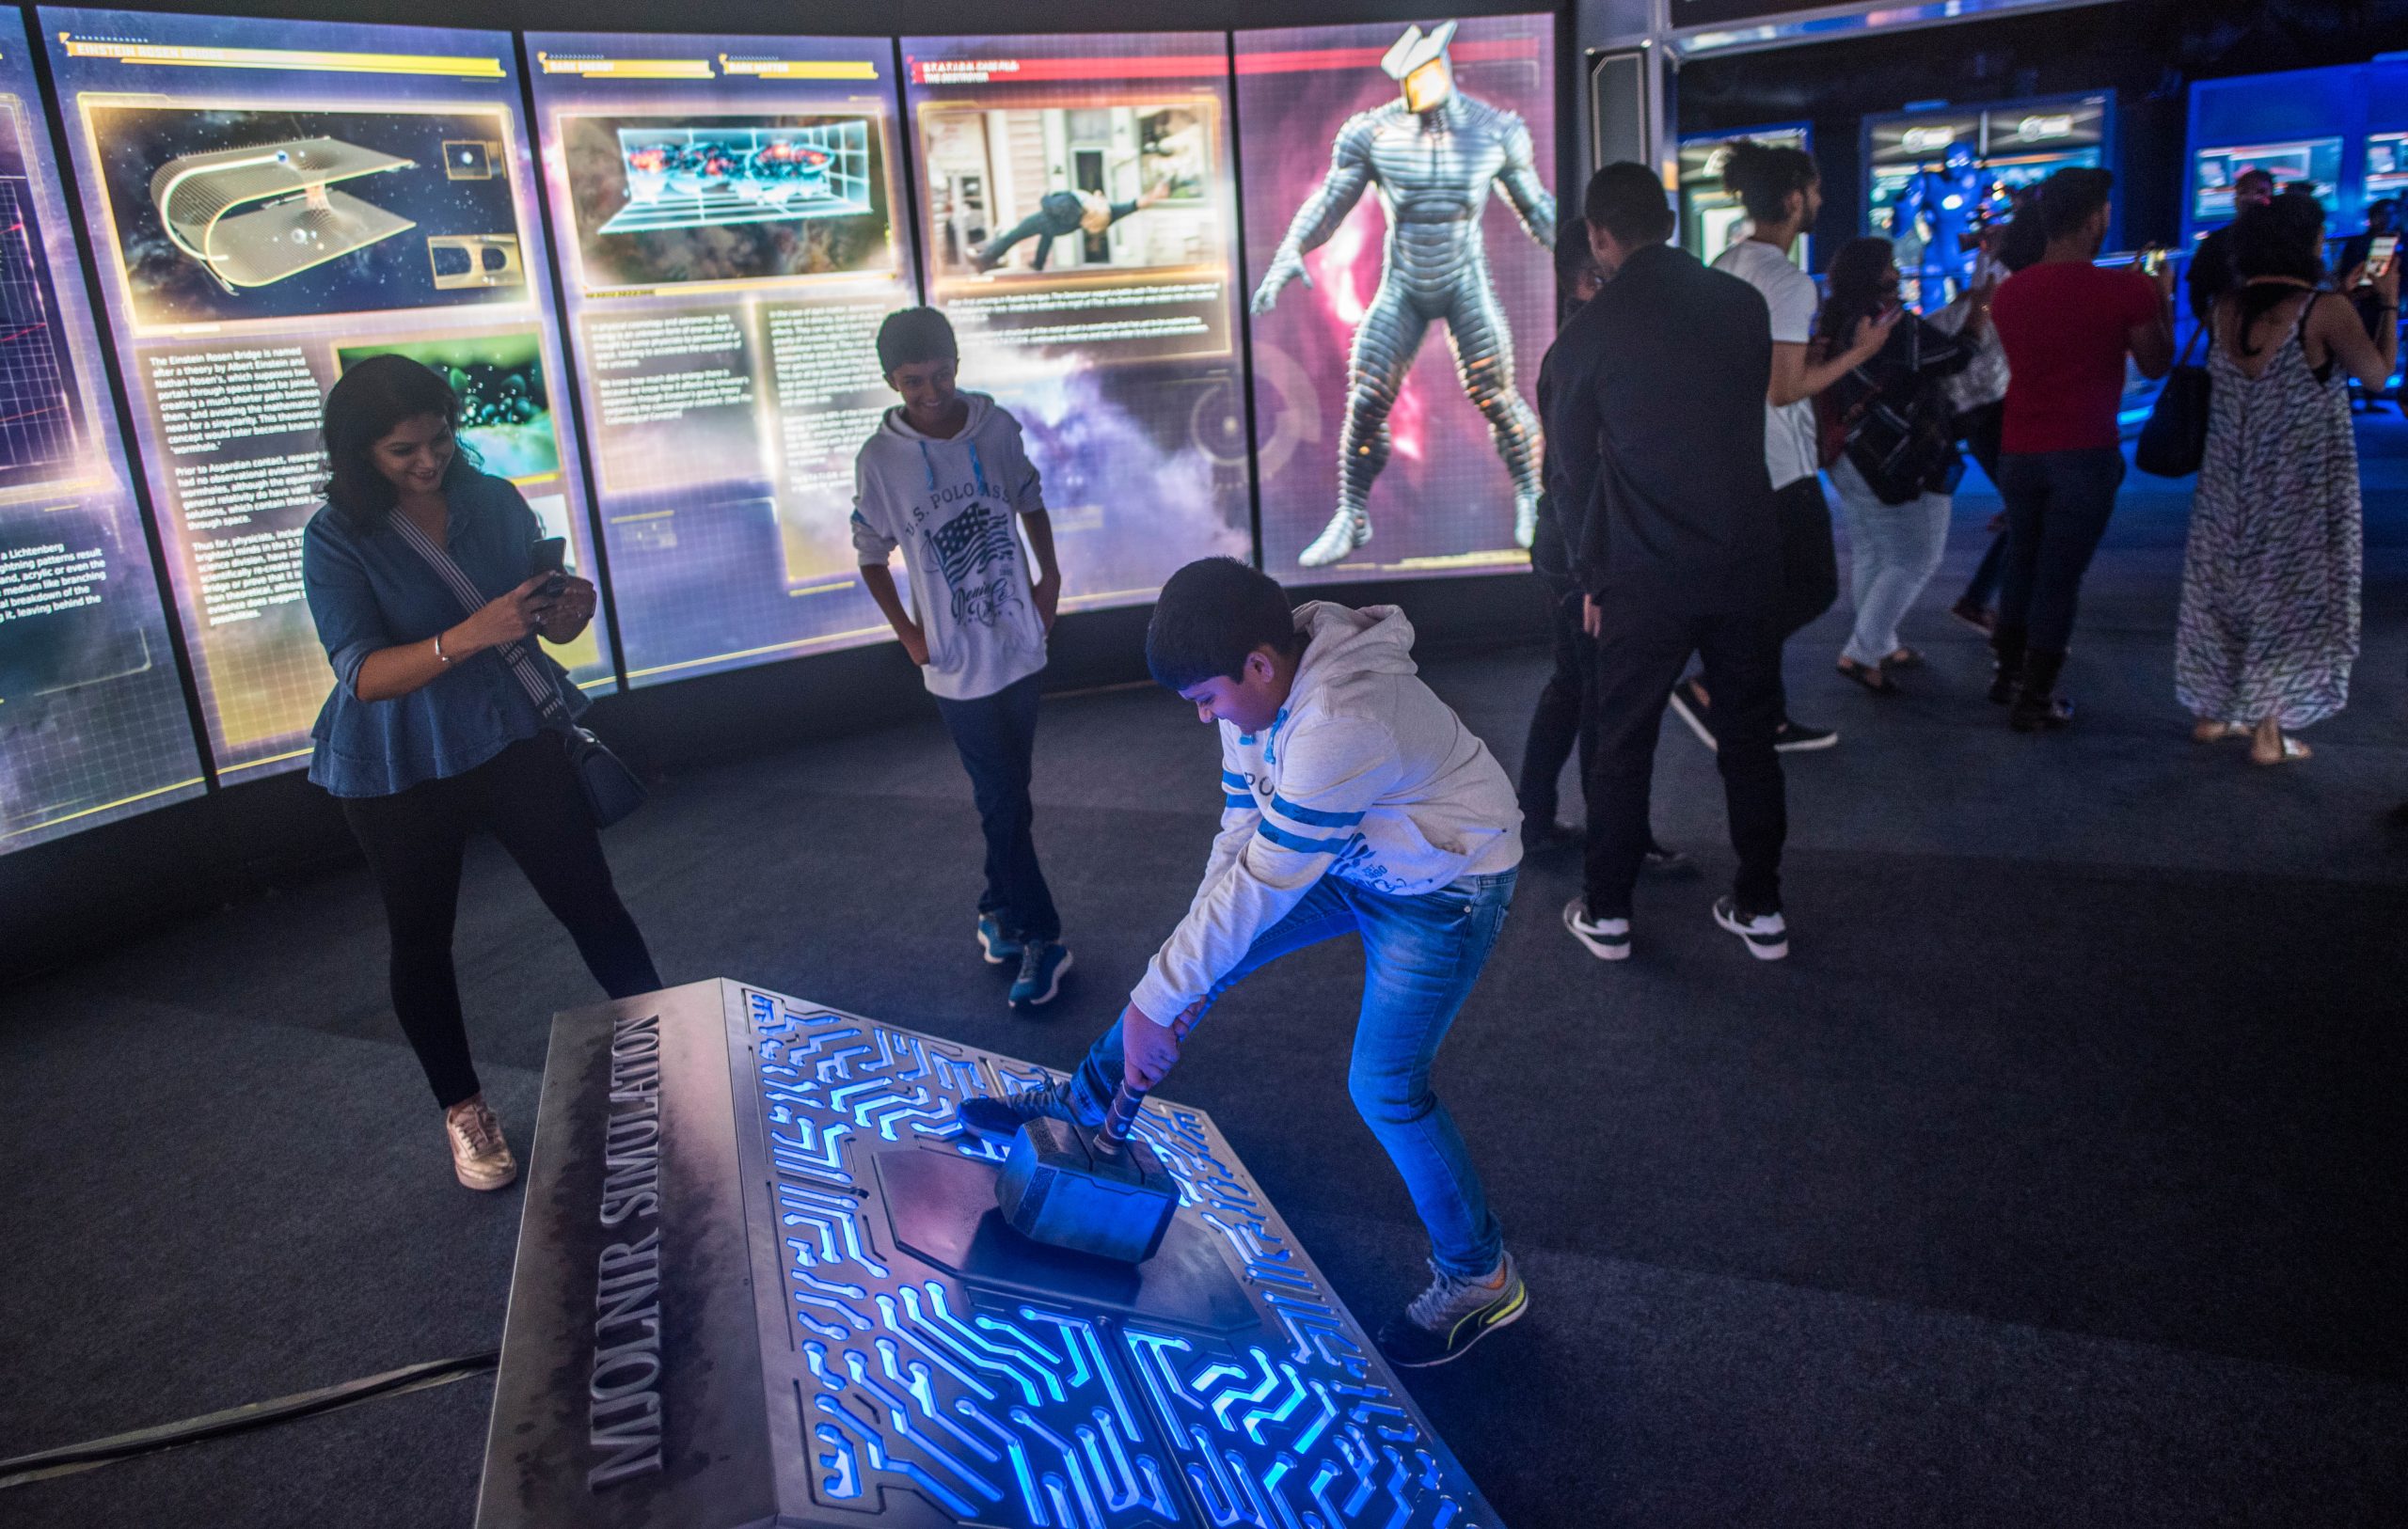 People Visit At Avengers S.T.A.T.I.O.N Exhibit In Mumbai